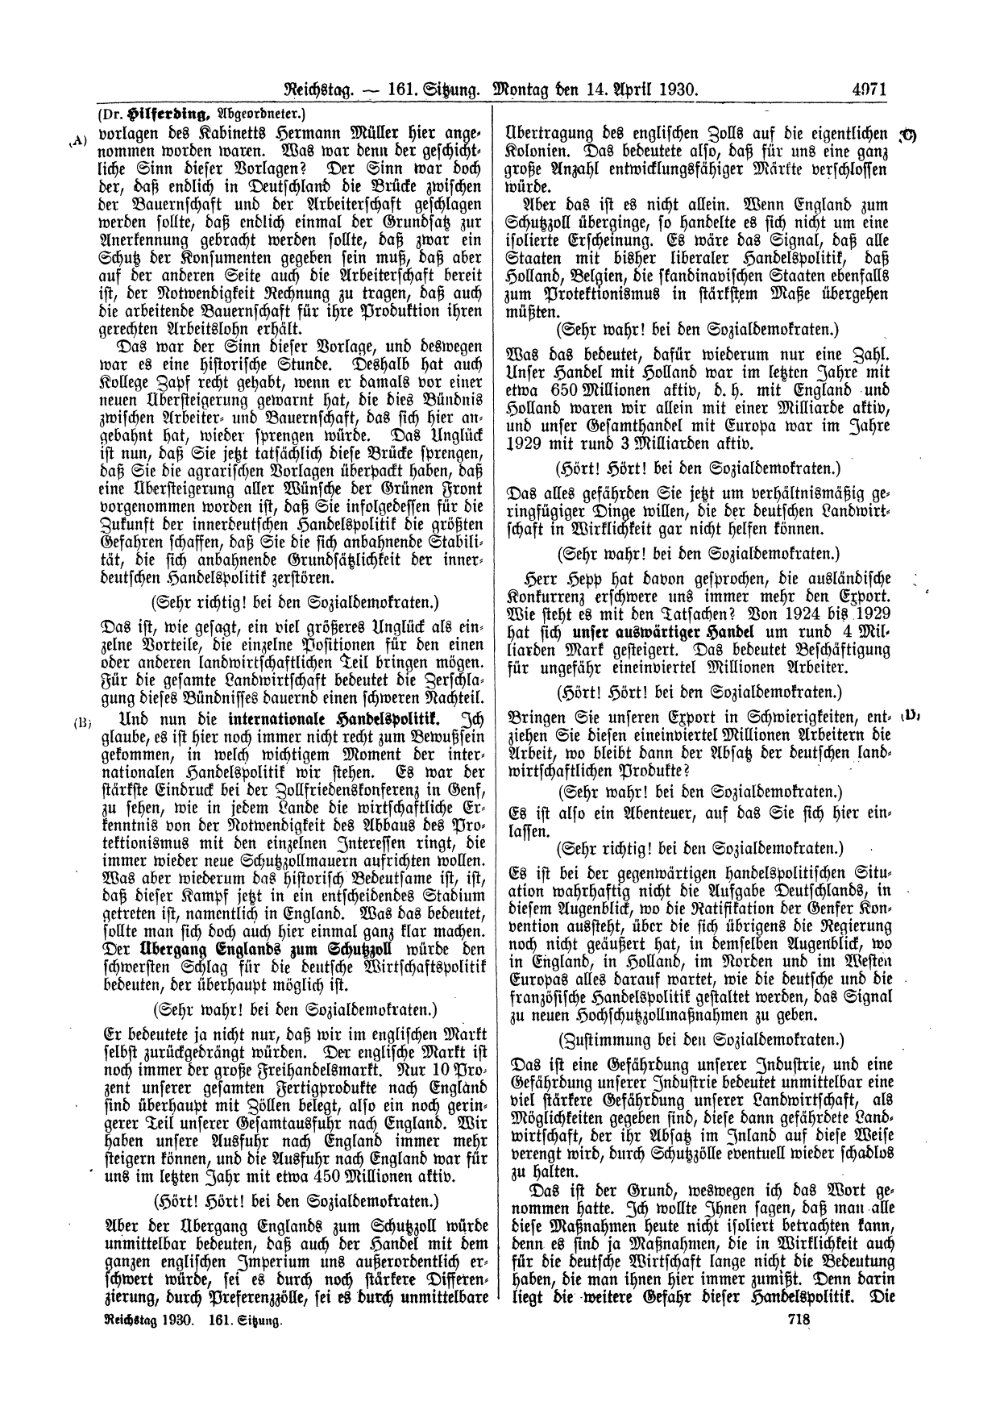 Scan of page 4971